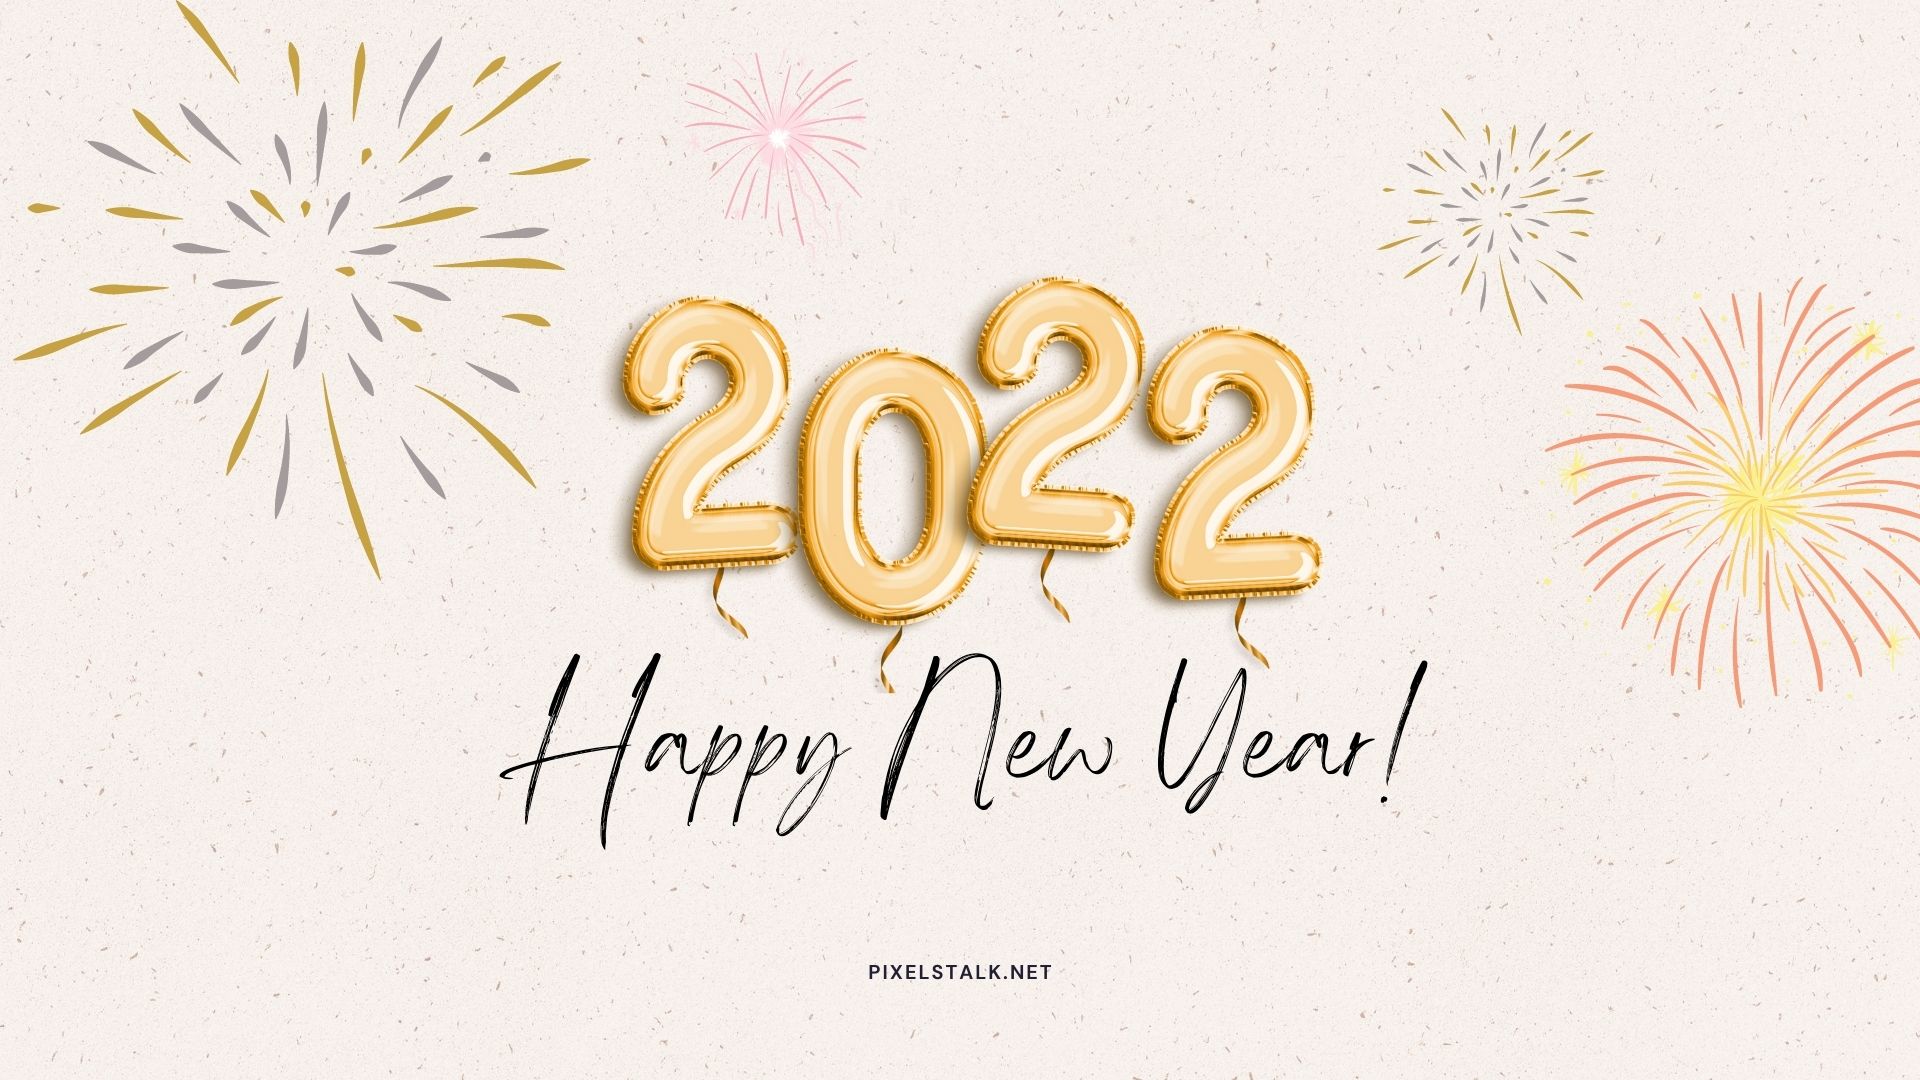 Happy New Year Wallpapers HD download 1920x1080